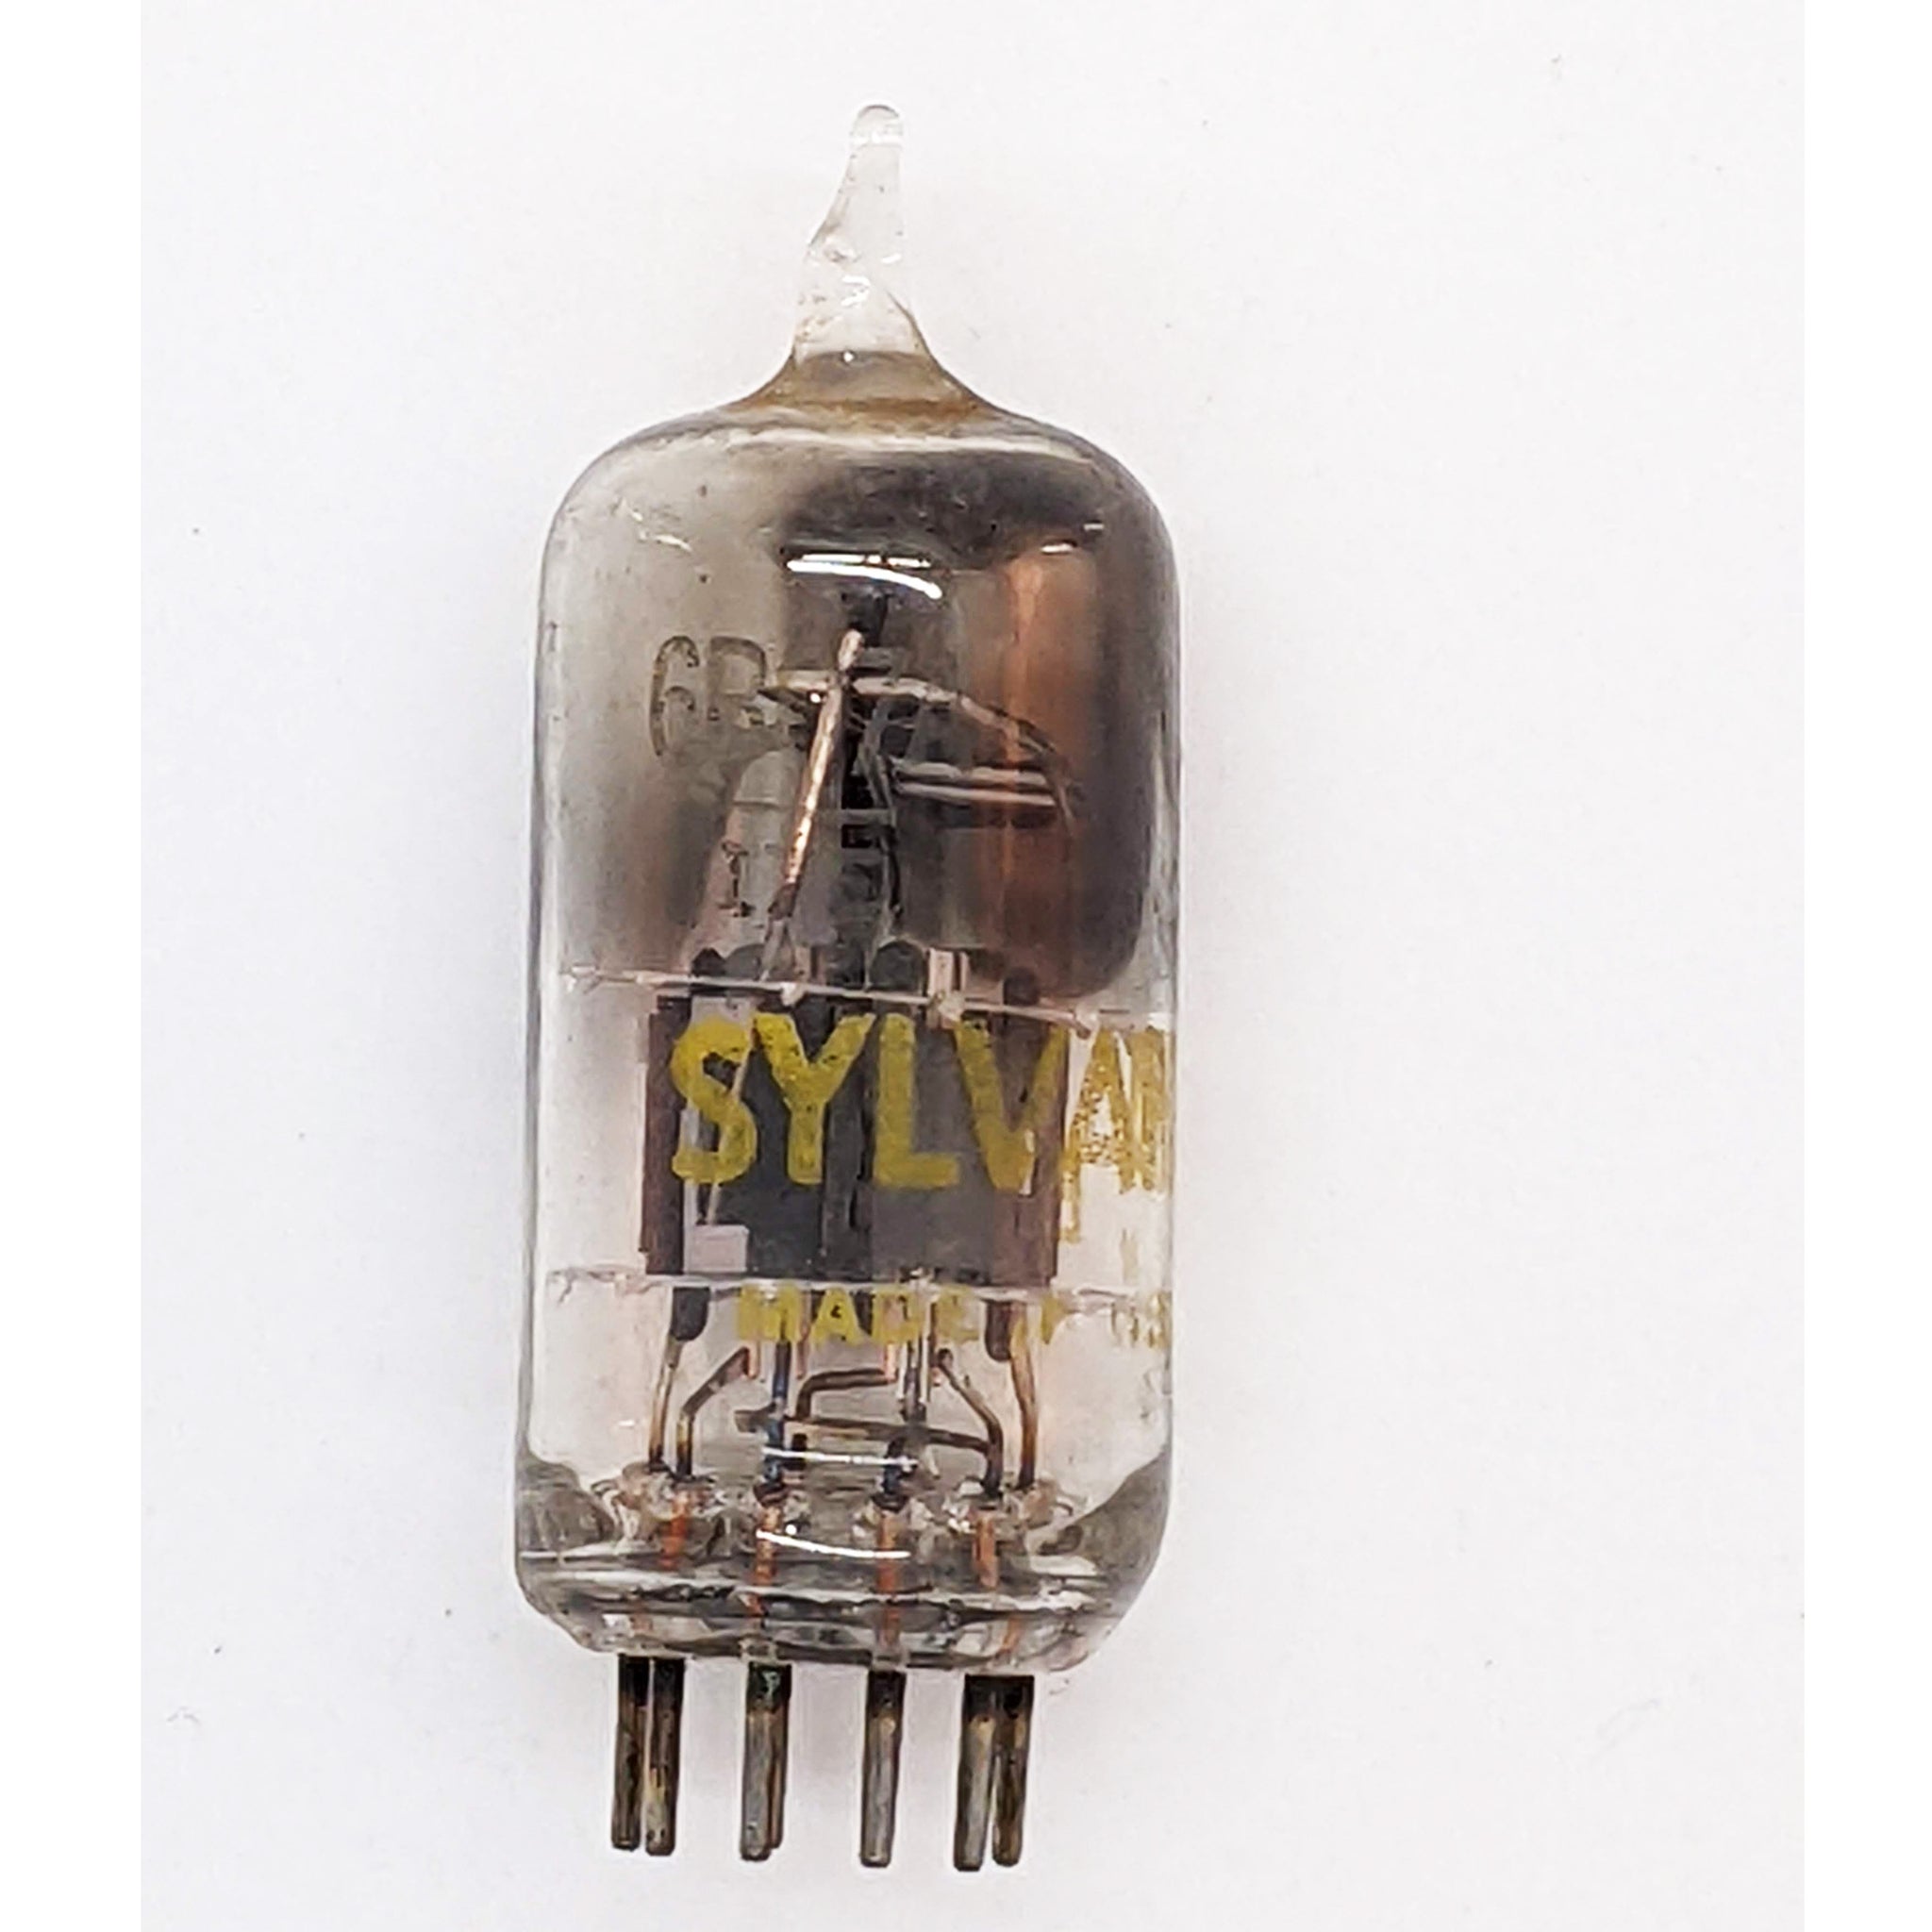 6BQ7A Vacuum Tube, Tested Good, Ships Quick From Mississippi